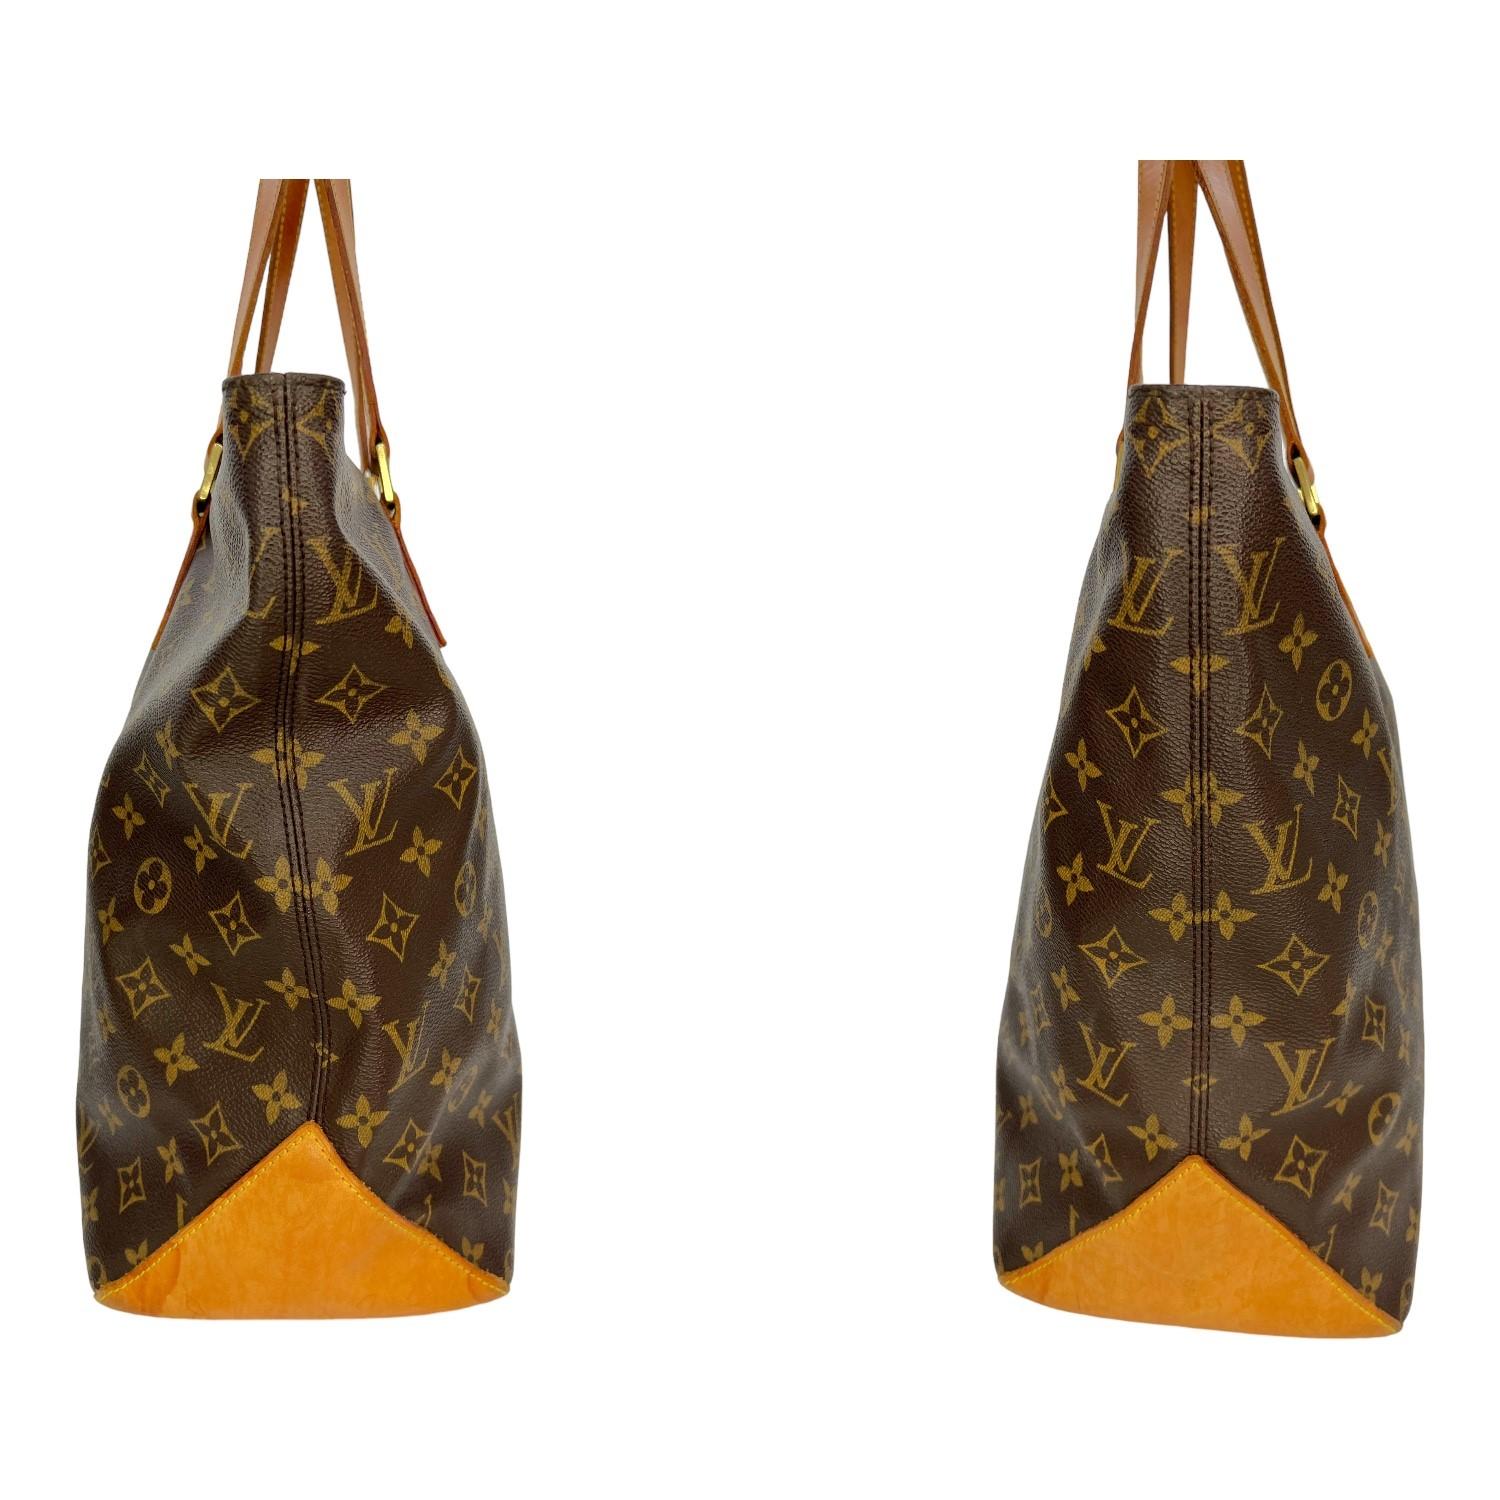 Louis Vuitton Vintage Monogram Cabas Piano Tote In Good Condition For Sale In Scottsdale, AZ